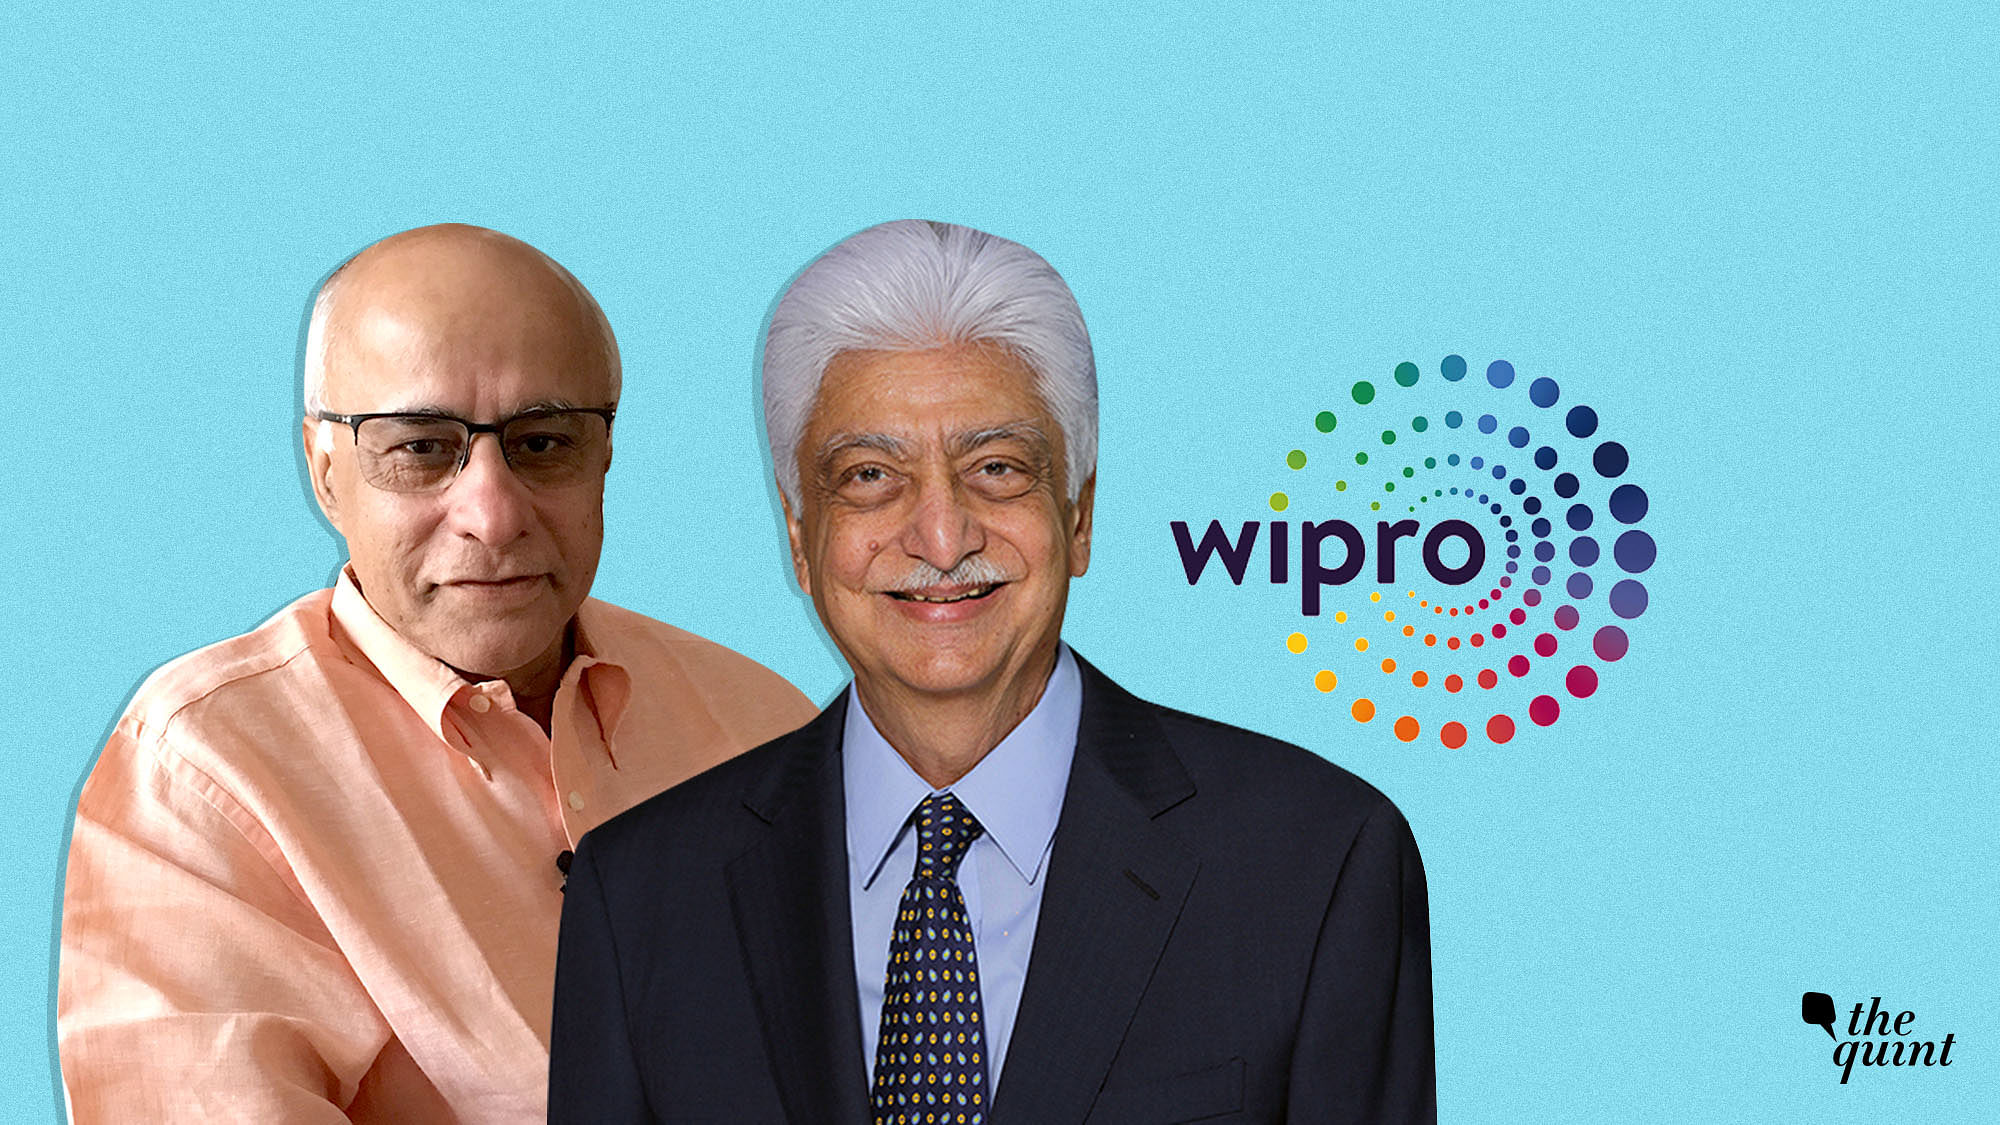 Subroto Bagchi worked with Wipro for several years before co-founding Mindtree.